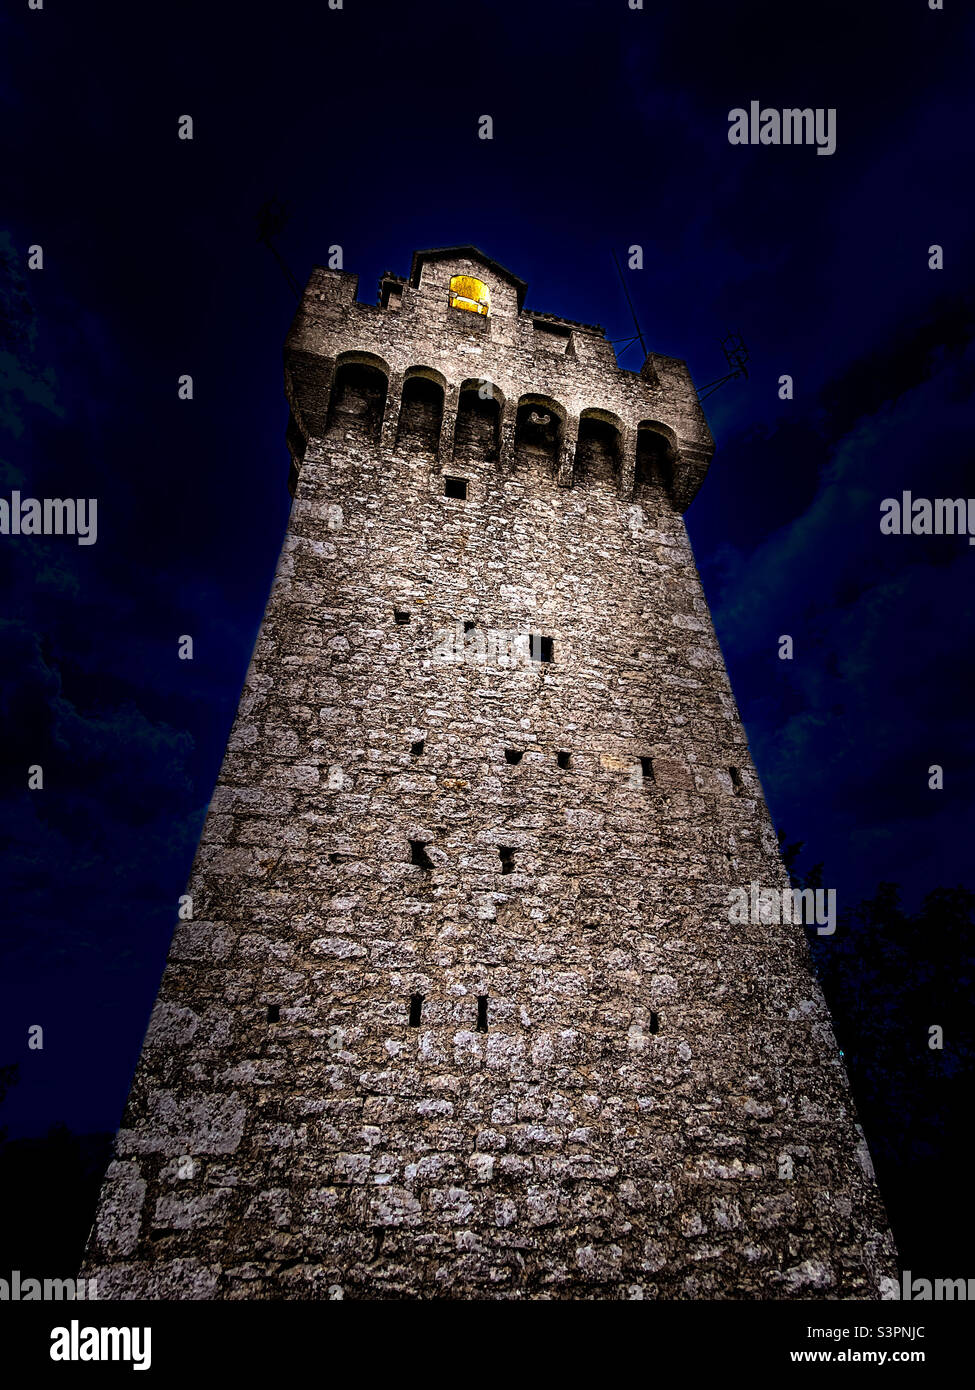 Castle tower at night Stock Photo